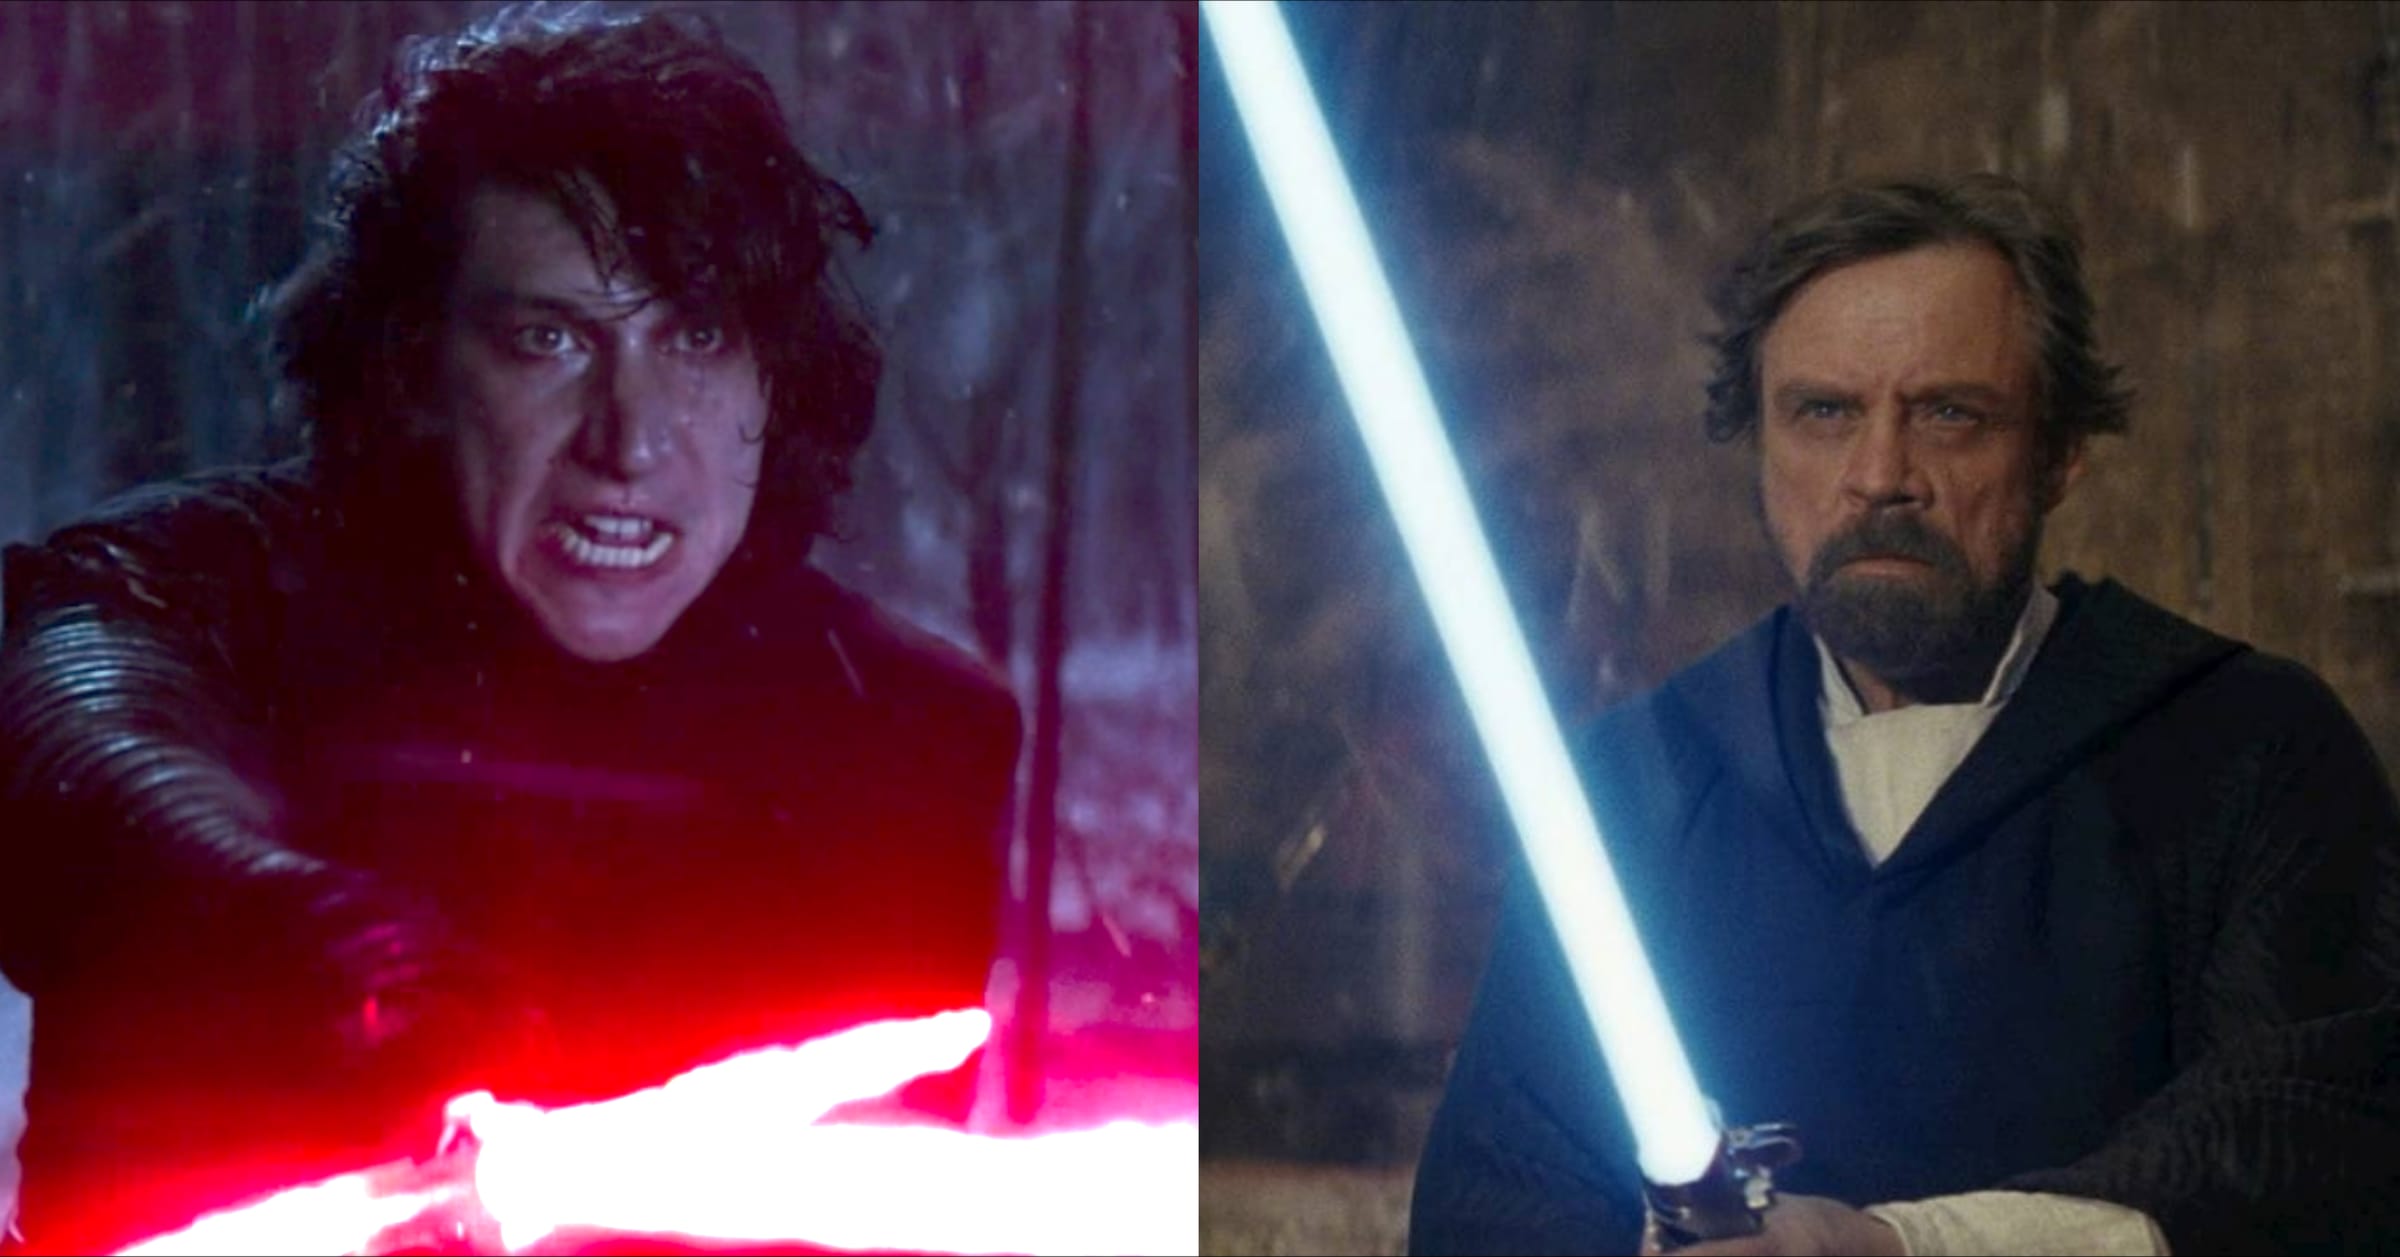 Star Wars: 25 Most Powerful Jedi Ever, Ranked